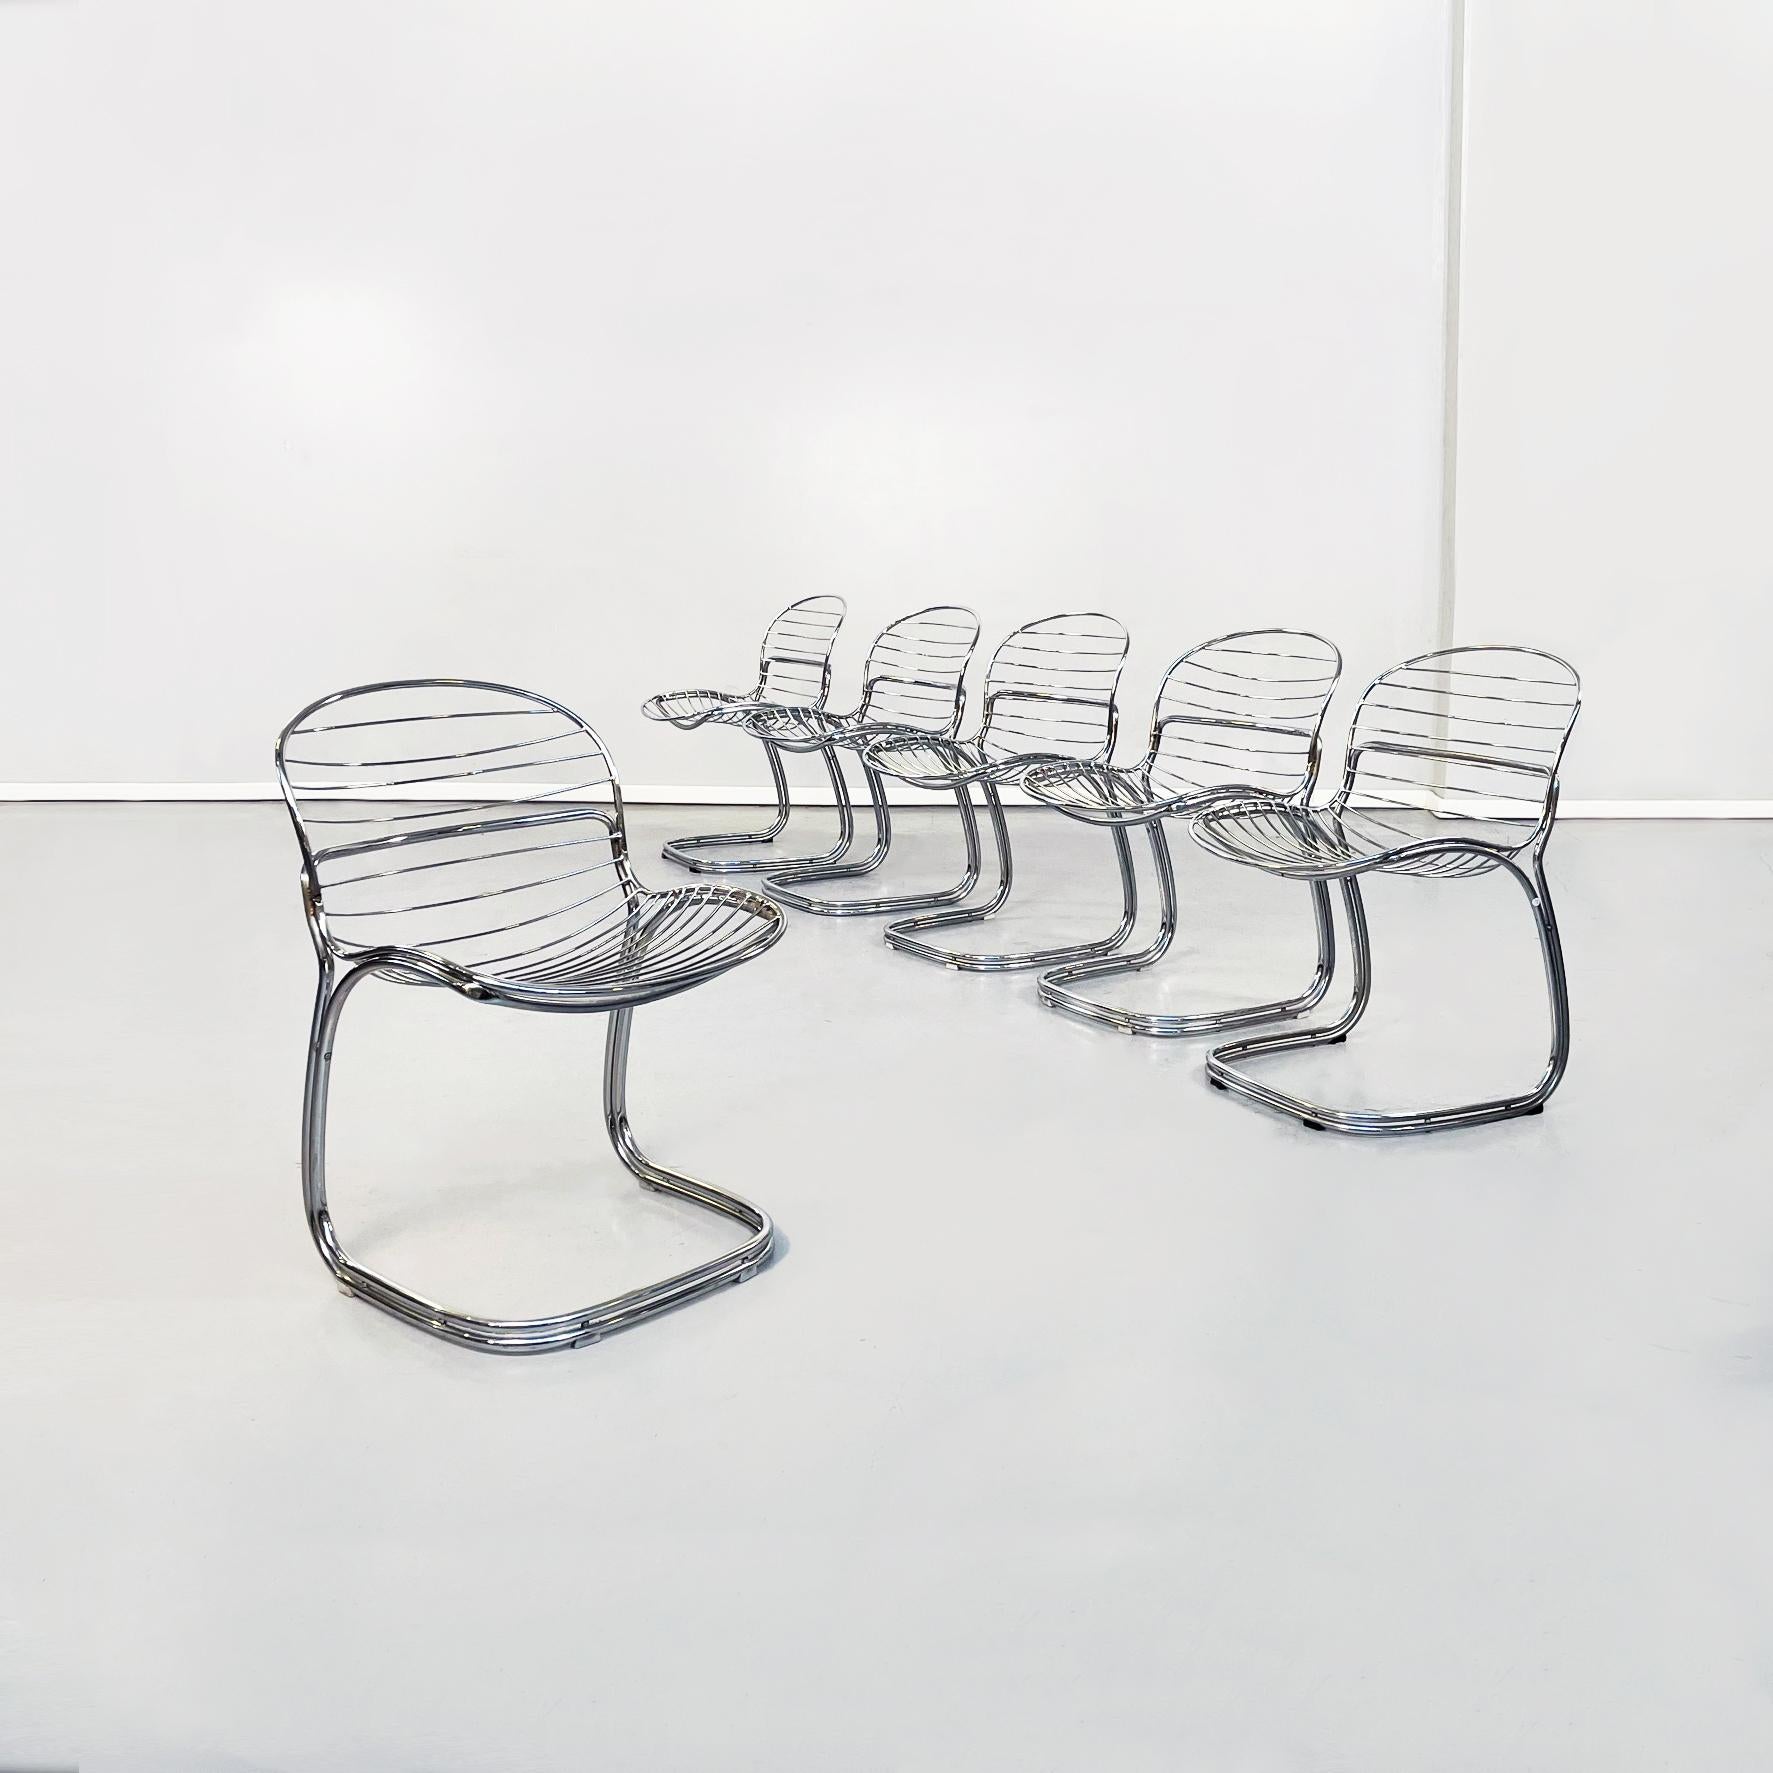 Italian mid-century steel sabrina chairs by Gastone Rinaldi for Rima, 1970s
Set of 17 Sabrina chairs in curved chromed steel. The seat and back are made of fine tubular chromed steel that follows the shape of the body.
Produced by Rima in 1970s